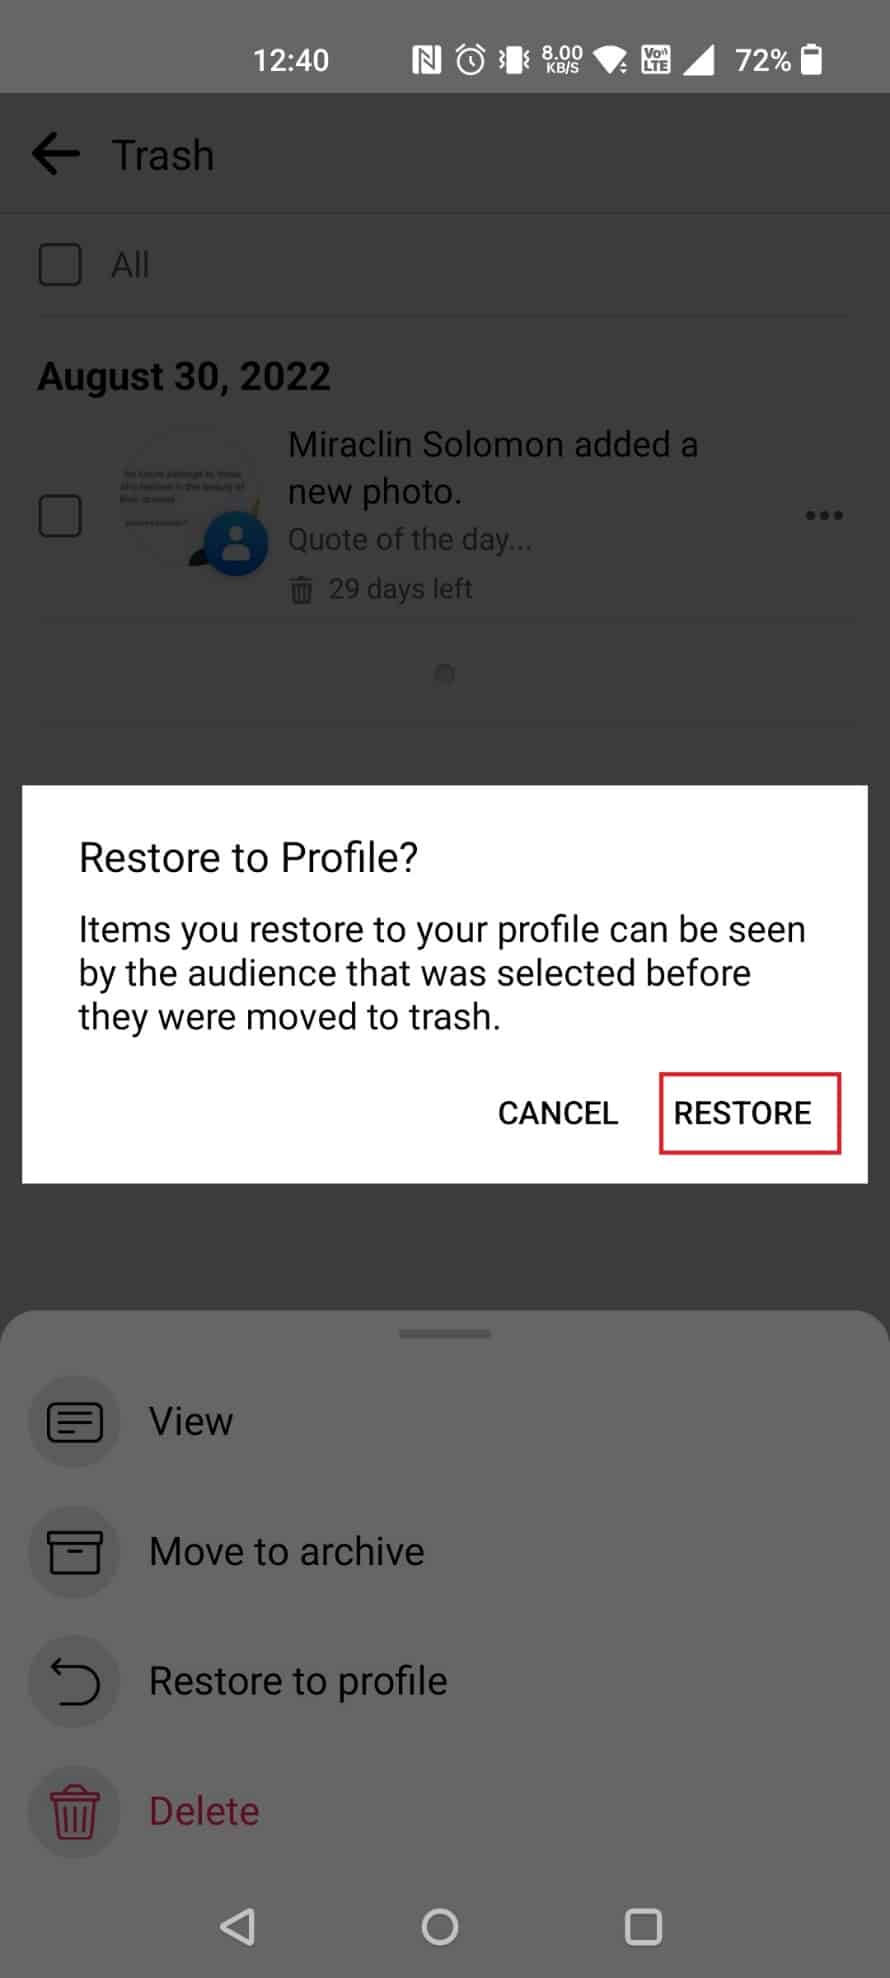 Tap on RESTORE in the pop-up